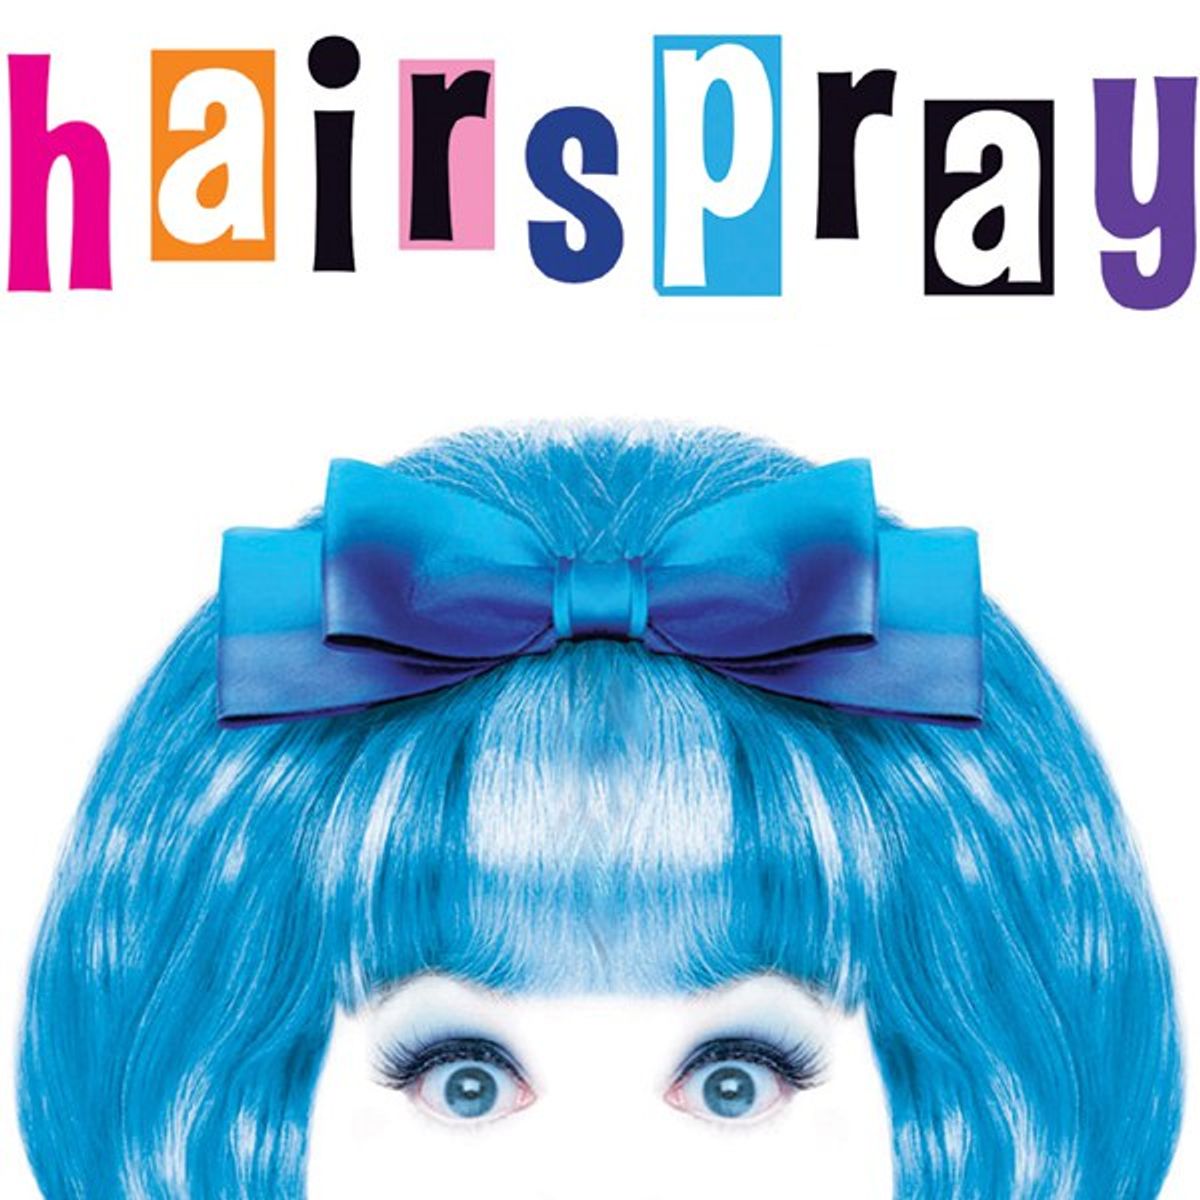 Why Hairspray Is So Important